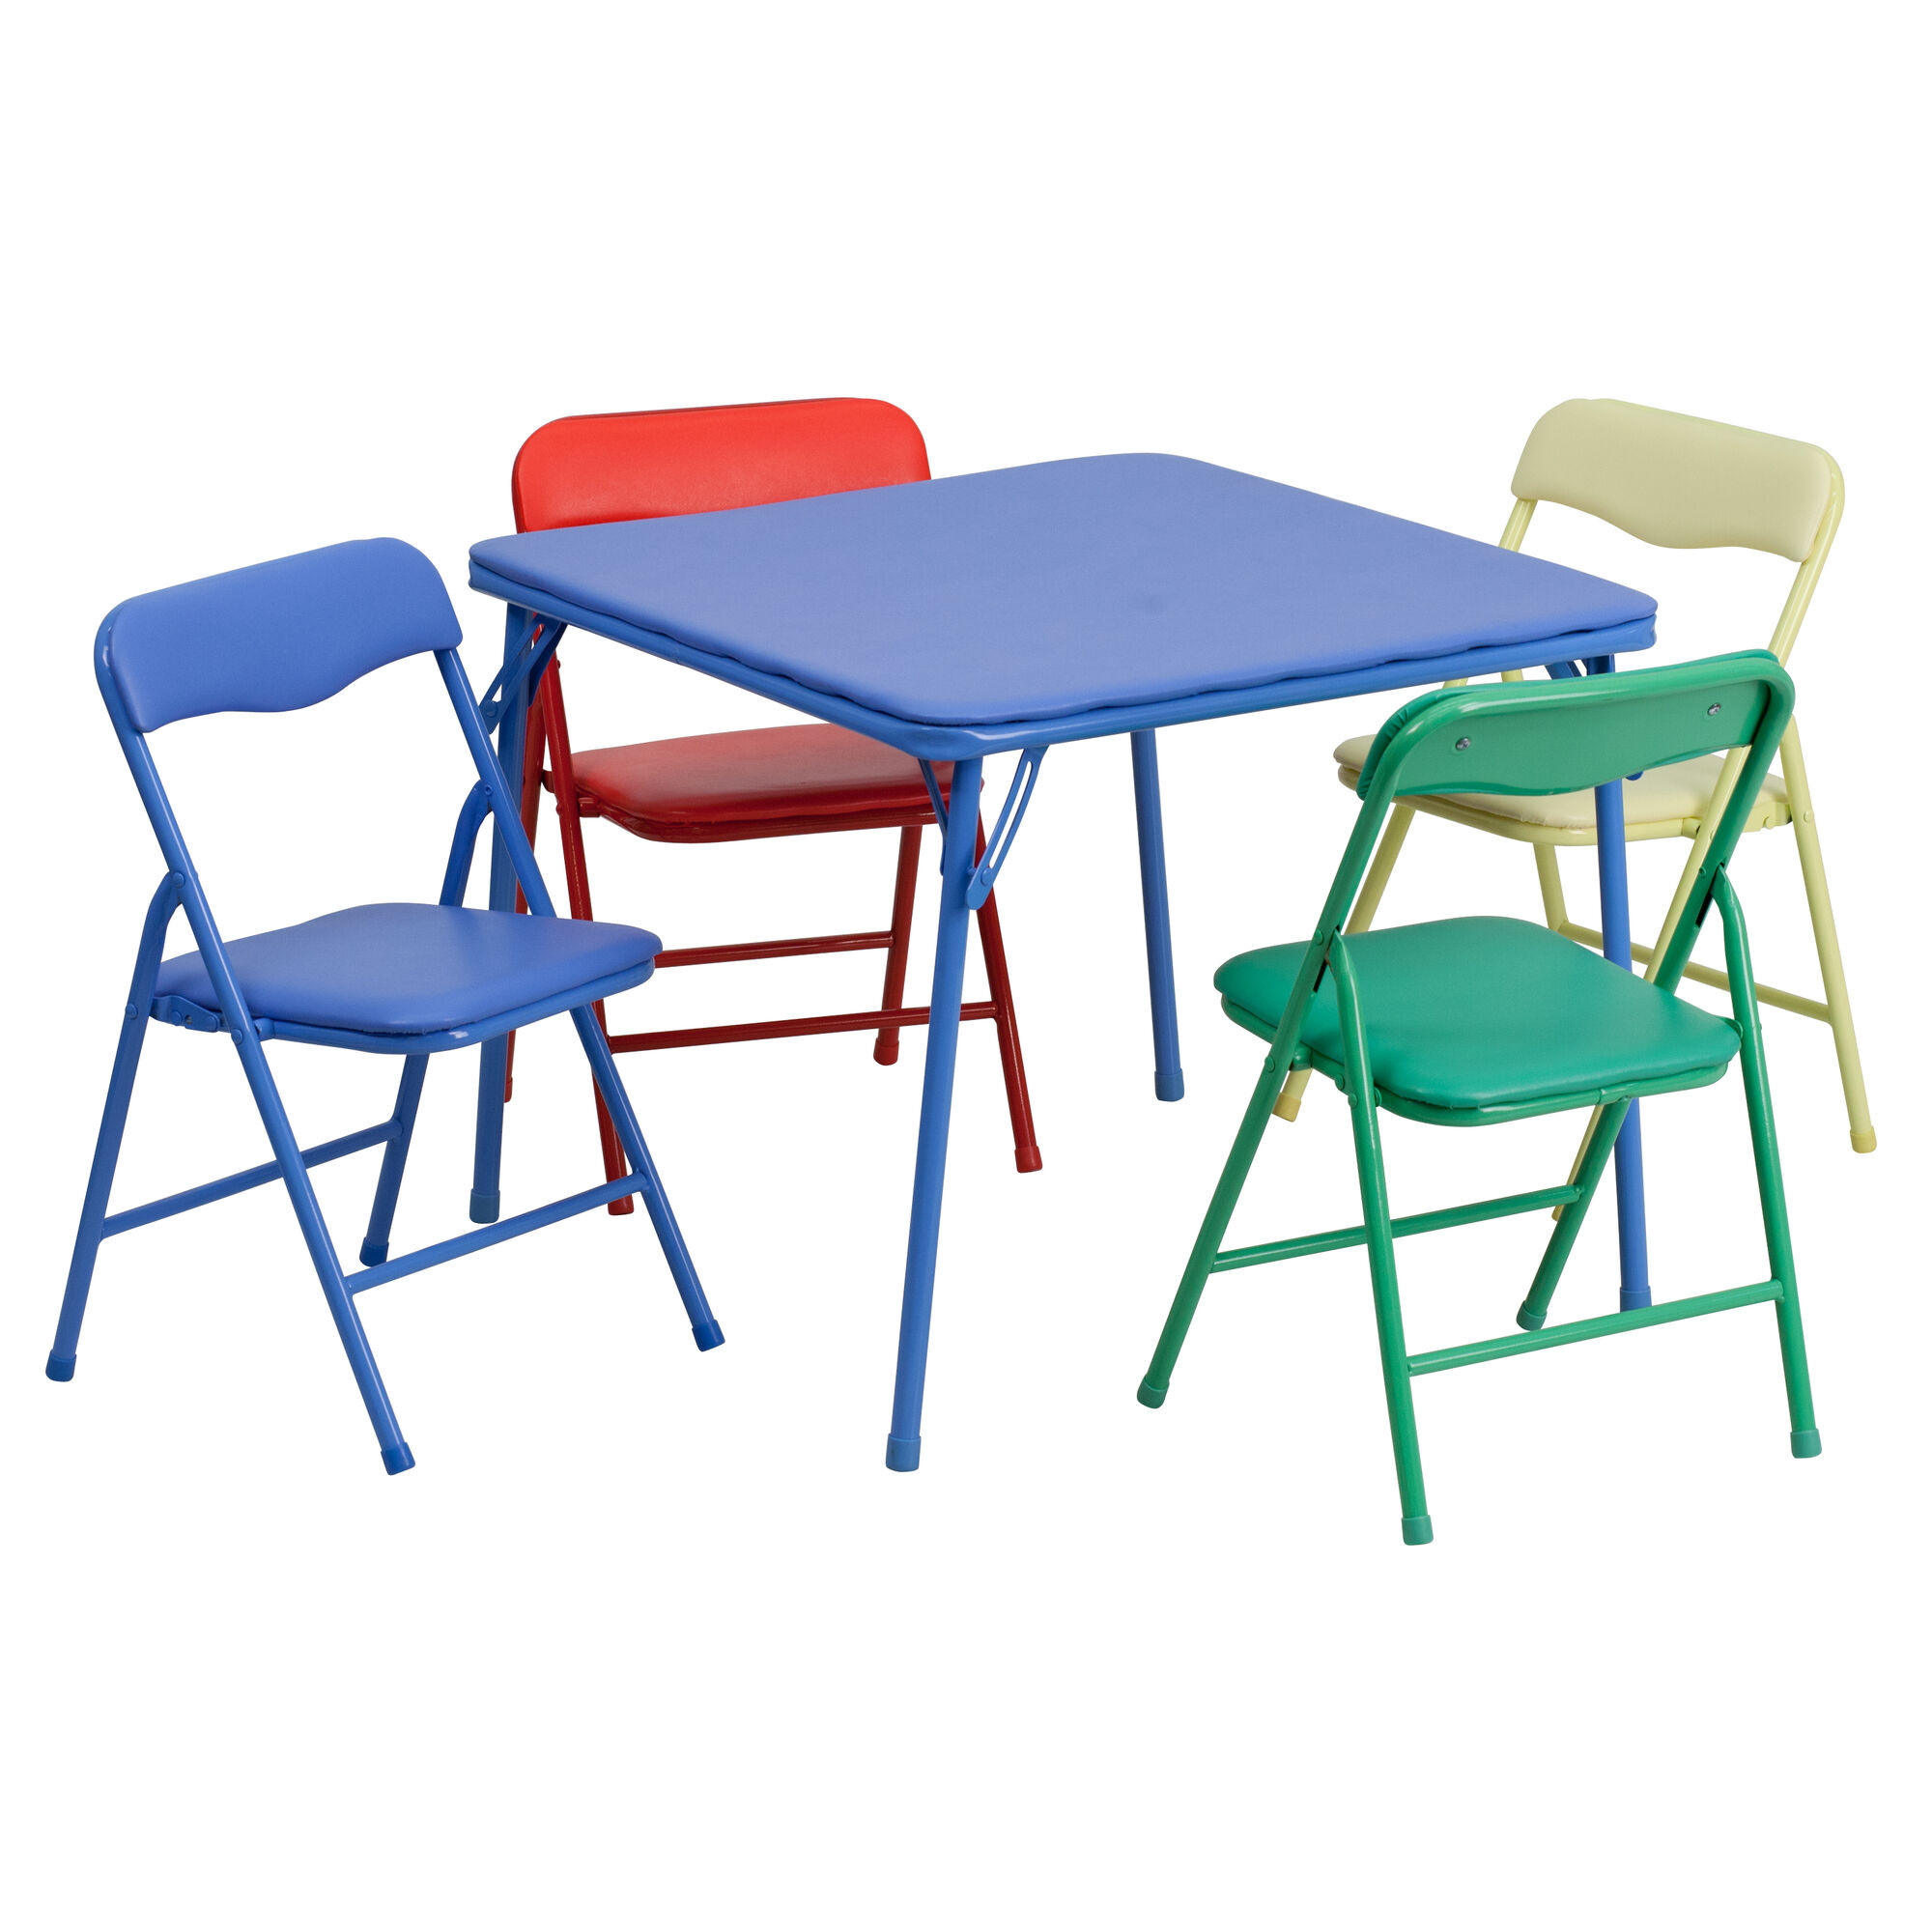 Kids Foldable Table And Chairs
 Colorful Kid Folding Table Set JB 9 KID GG